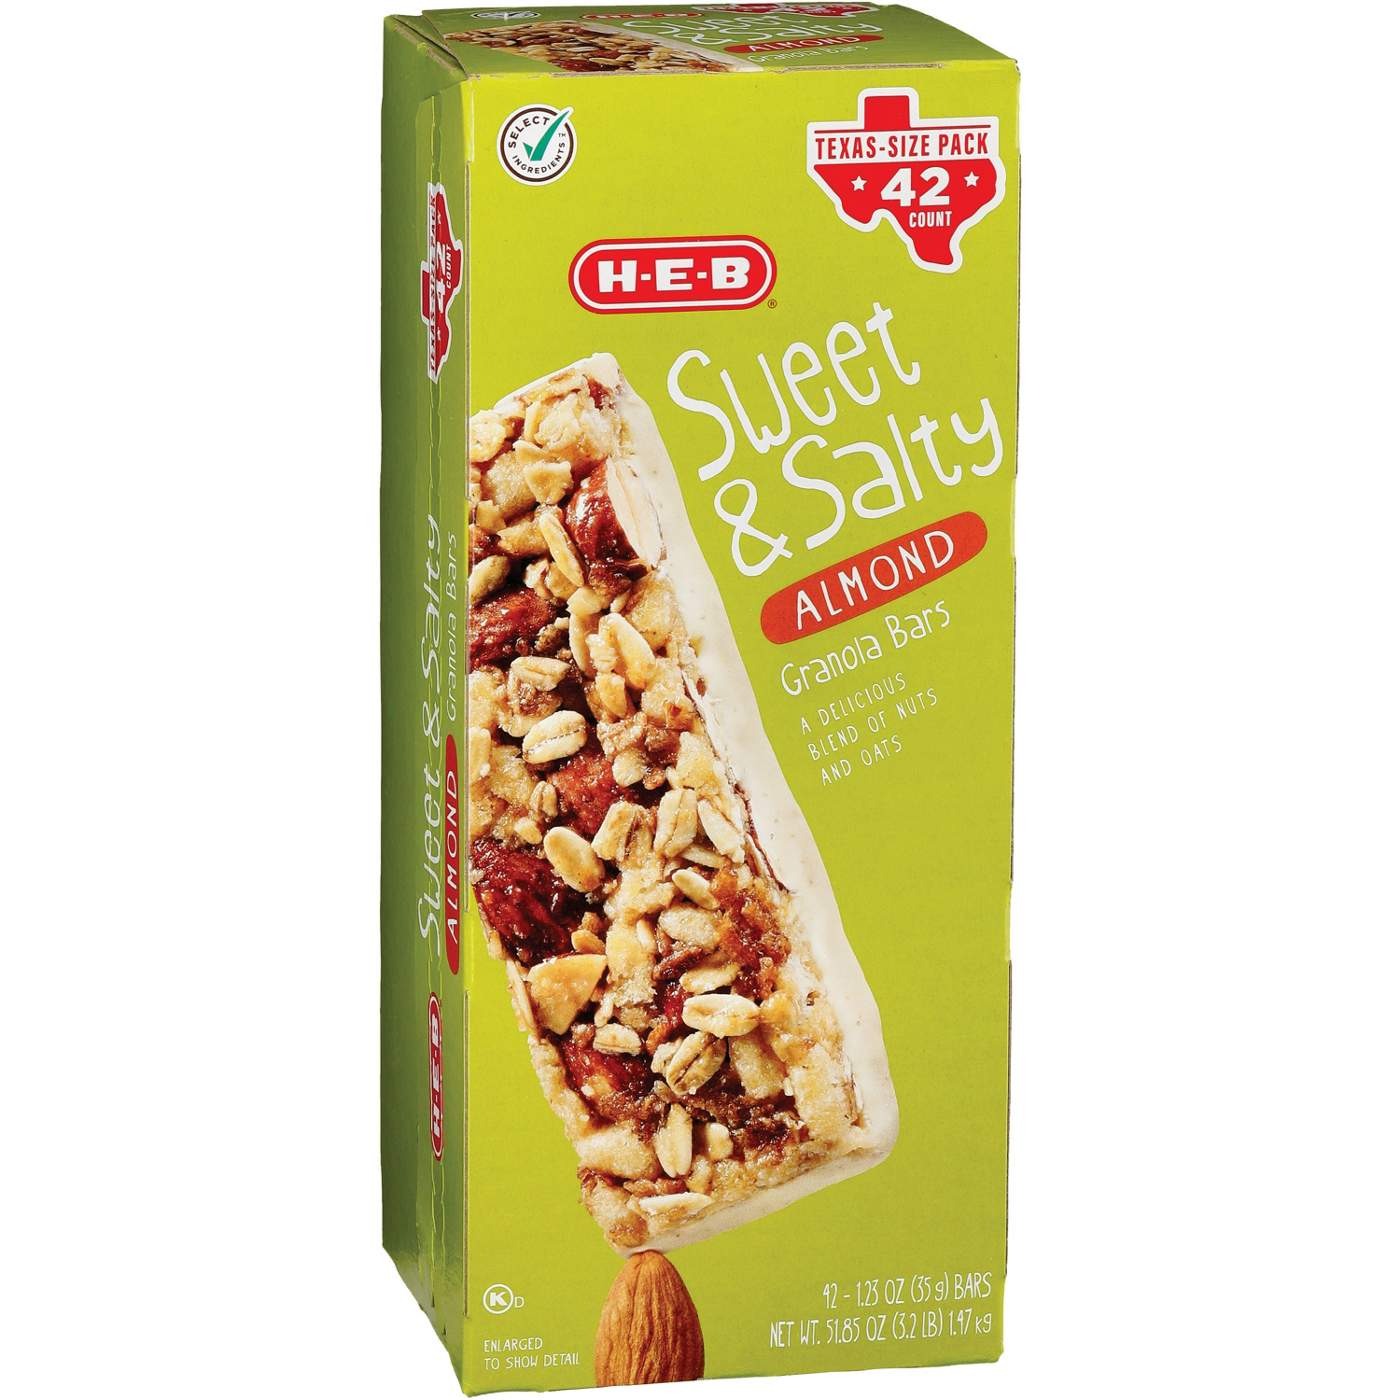 H-E-B Sweet & Salty Almond Granola Bars - Texas-Size Pack; image 2 of 2